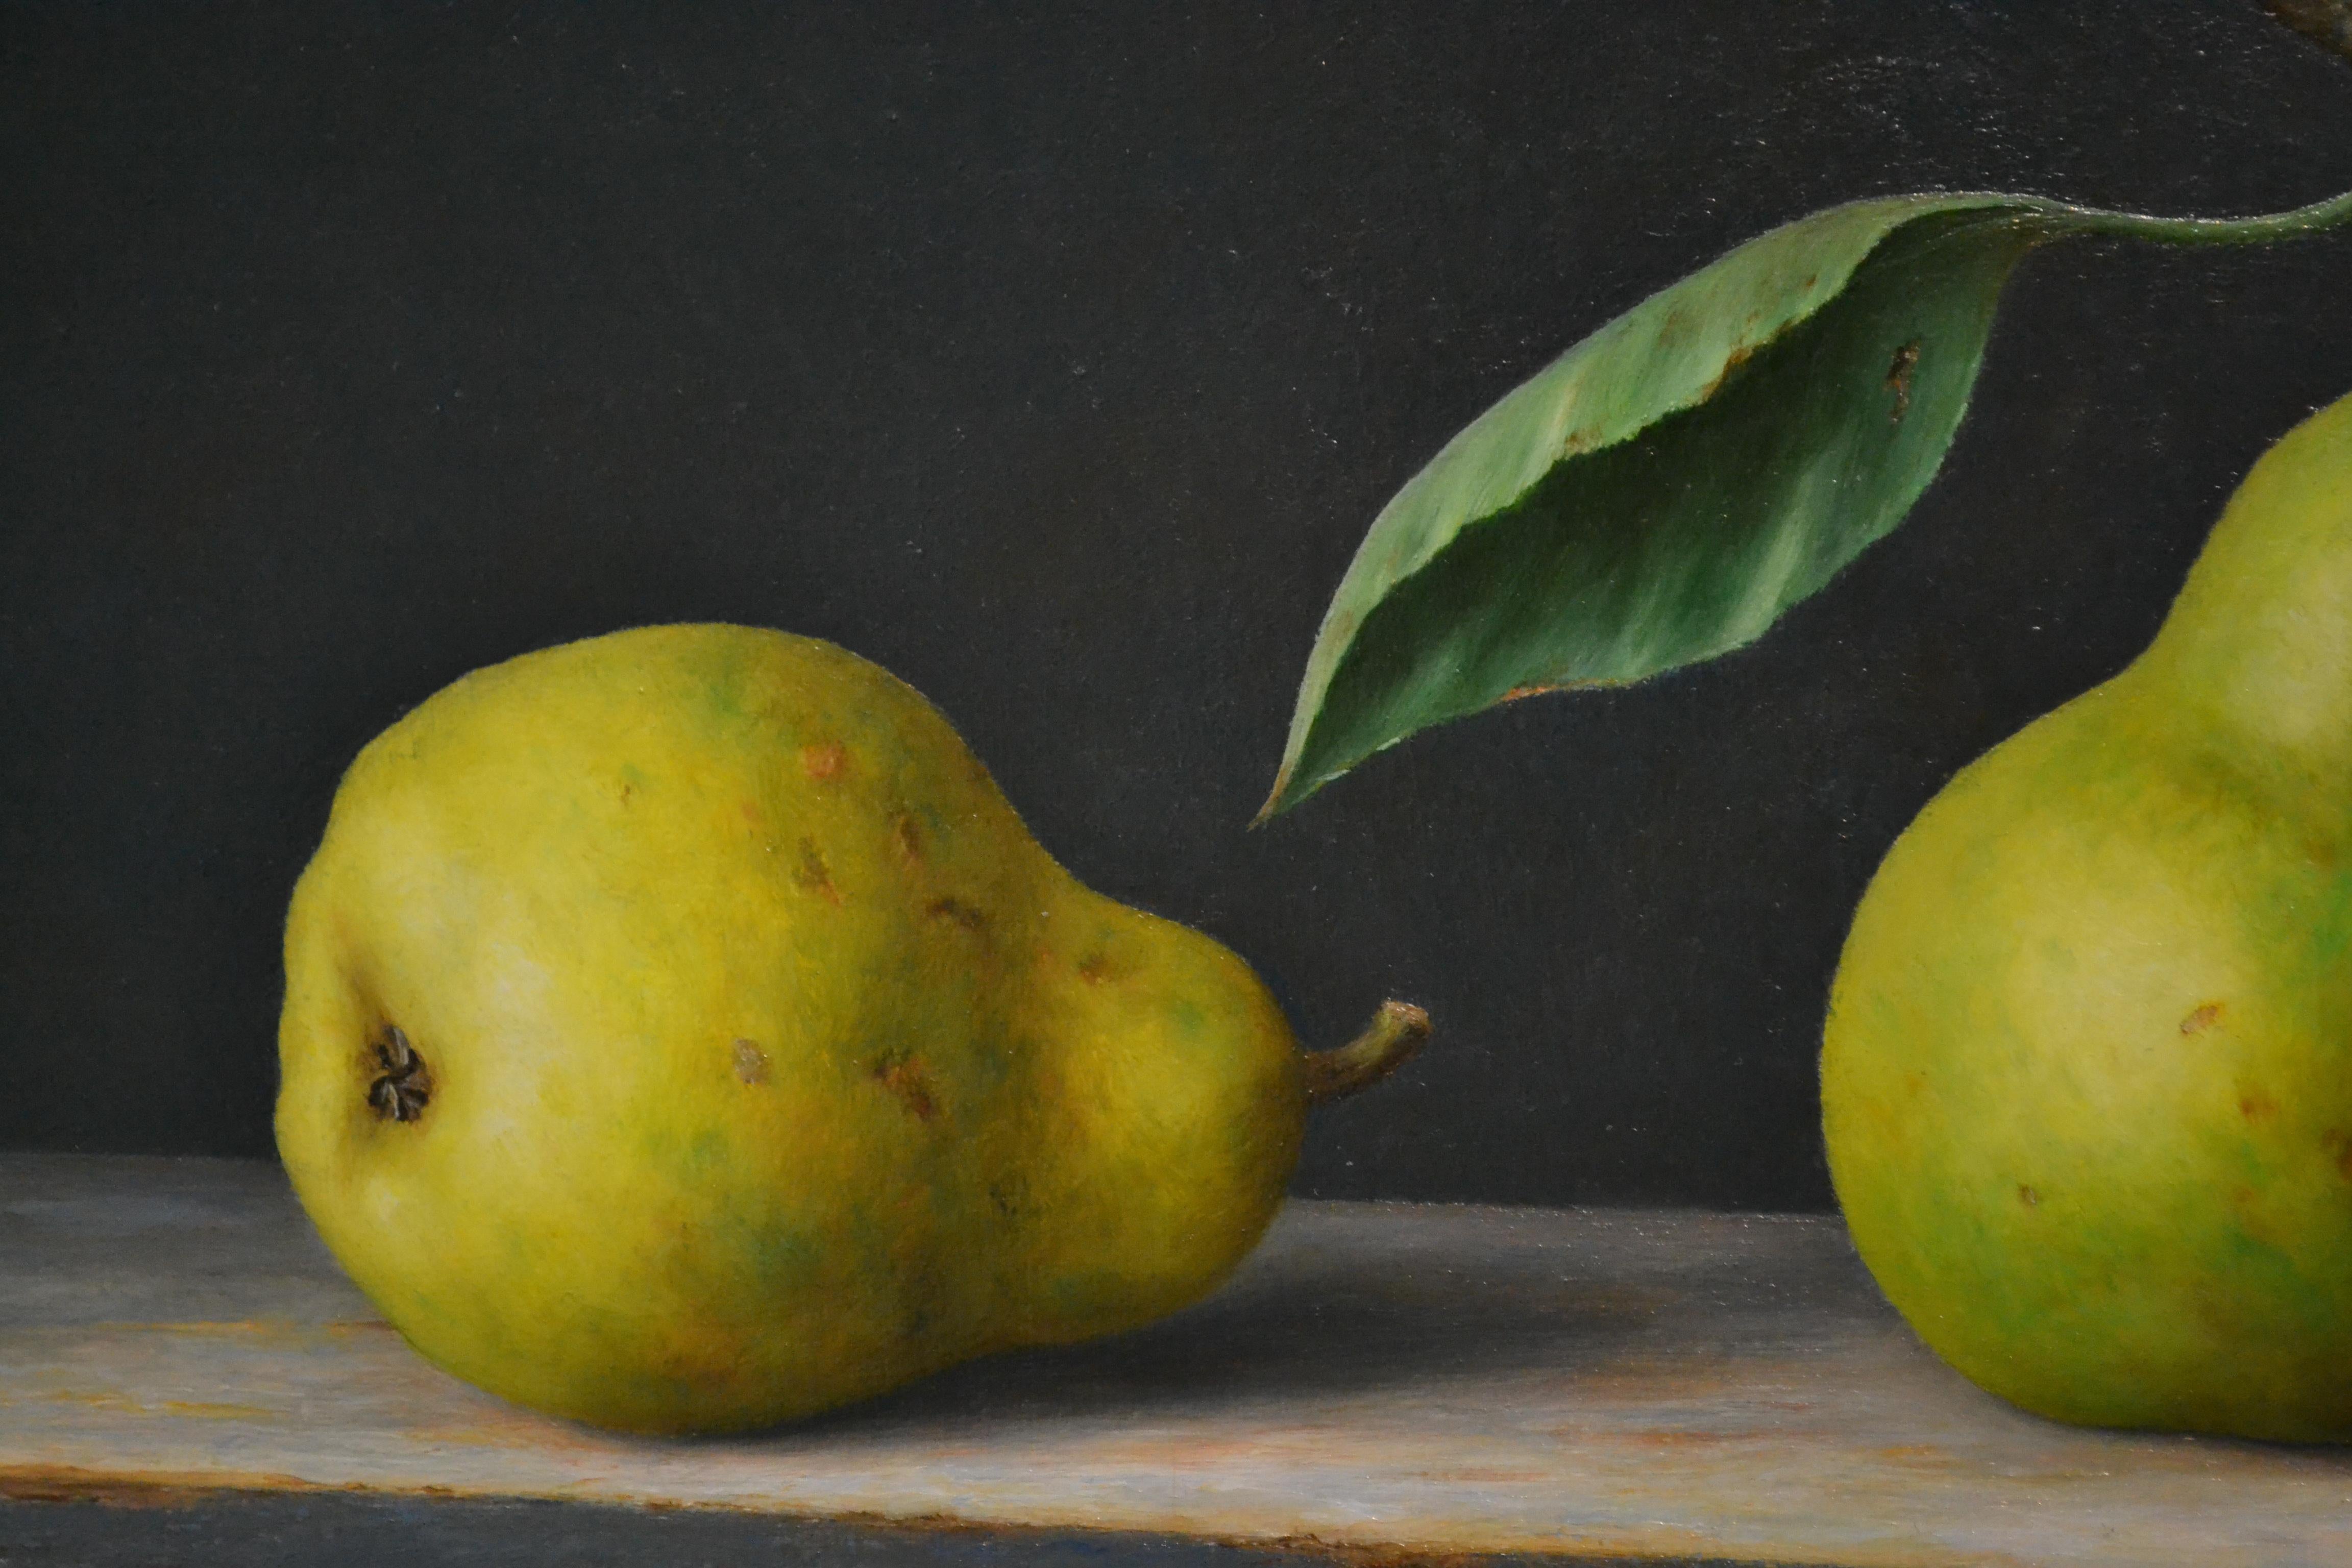 Pears - Annelies Jonkhart, 21st Century Contemporary Oil Painting with fruit 2